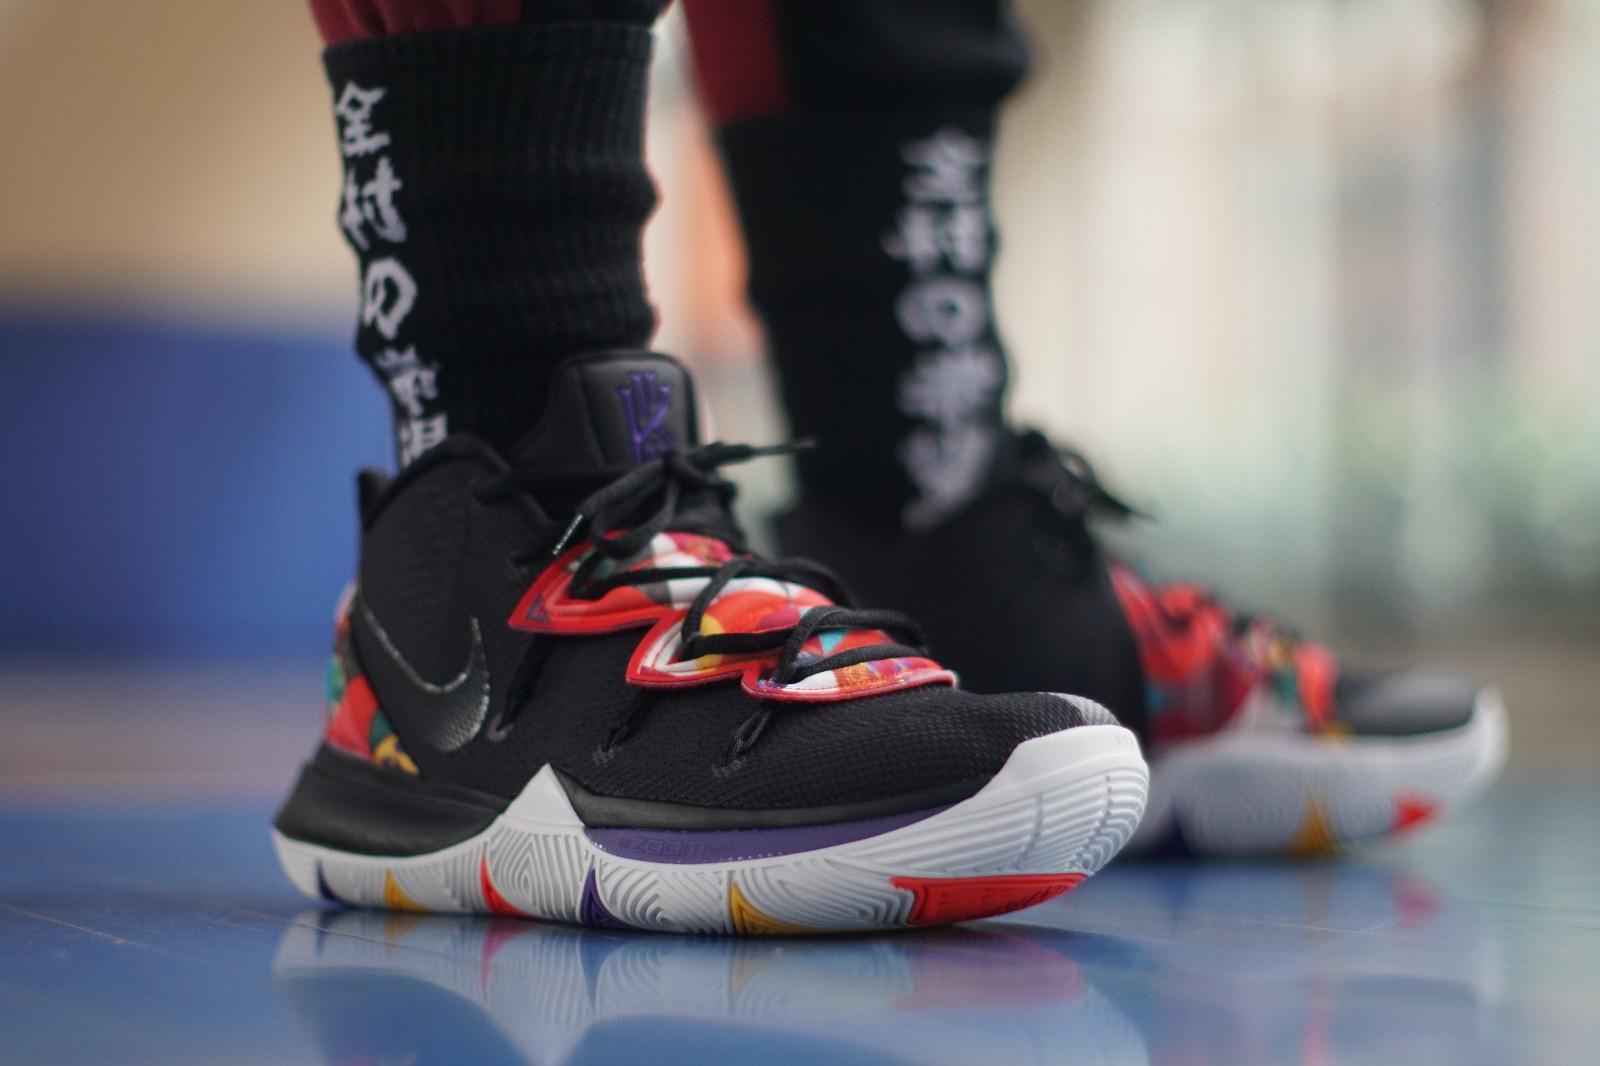 kyrie 5 bred review